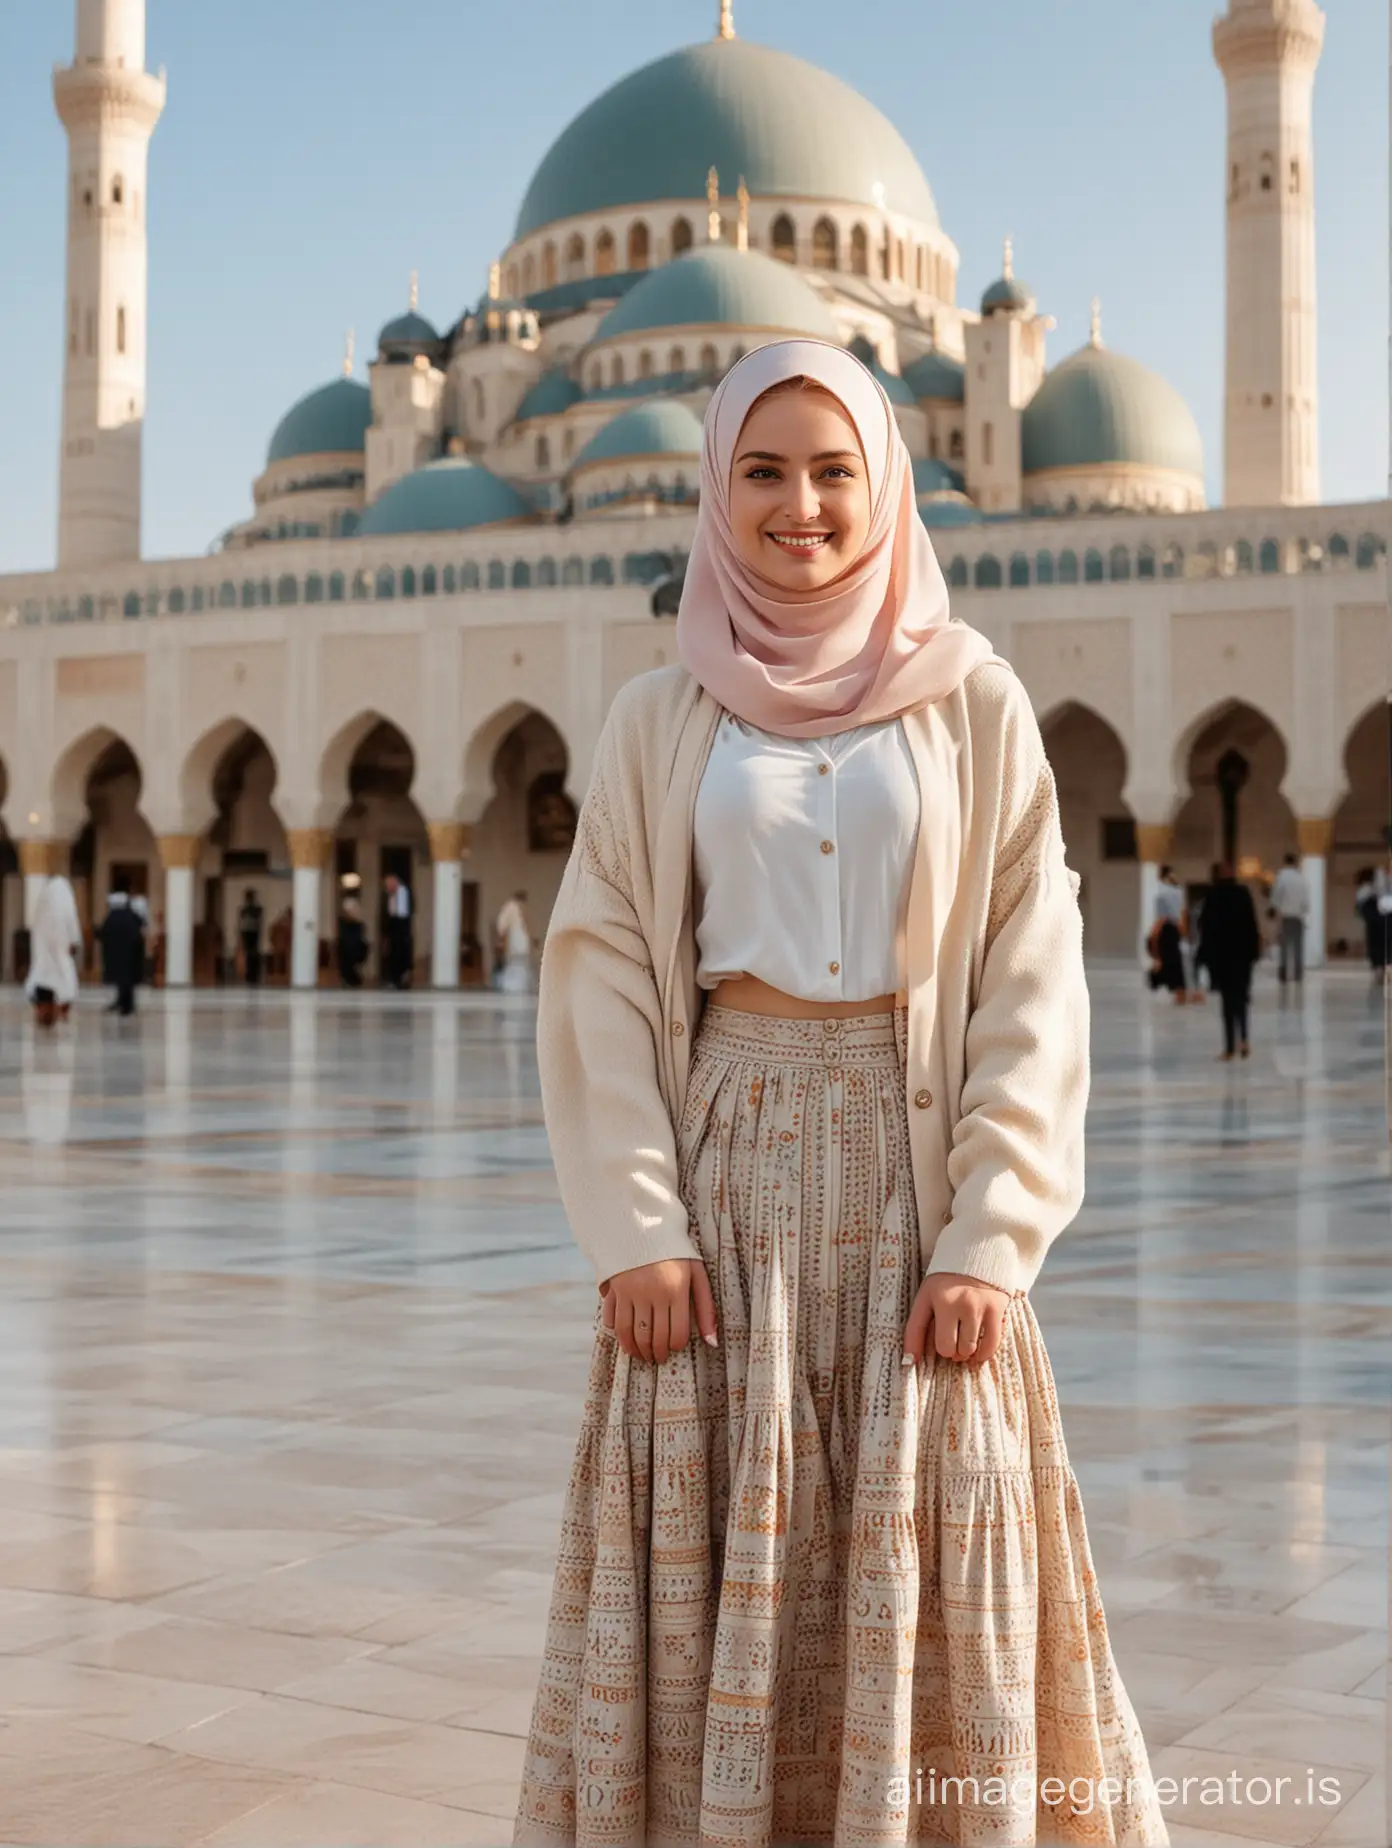 Russian-Muslim-Girl-in-Hijab-Smiling-at-Mecca-Mosque